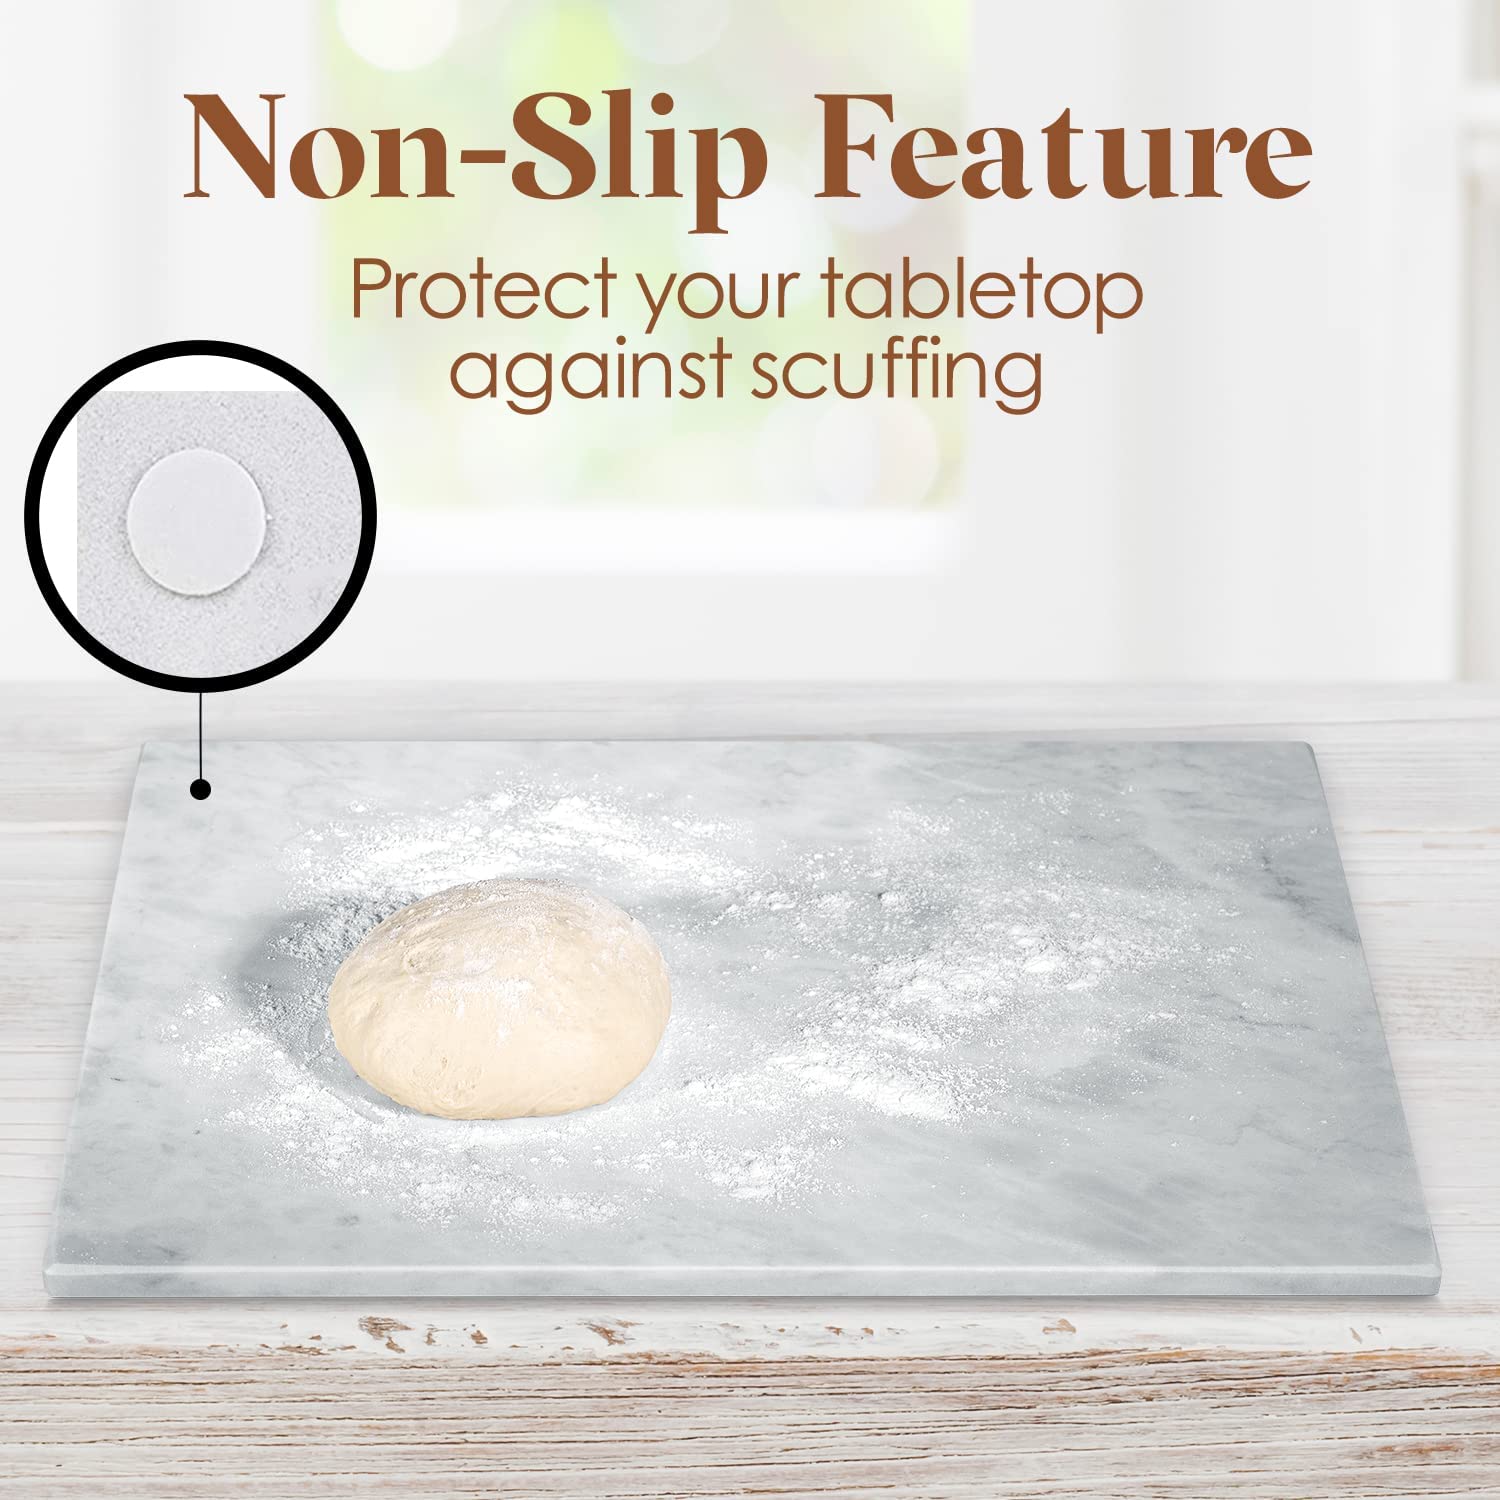 Kitchen Marble Stone Cutting Board - Marble Cutting & Charcuterie Board of 16 x 12 x 0.6 Inches, Non Slip Scratch Resistant Pastry Tray, Rectangular